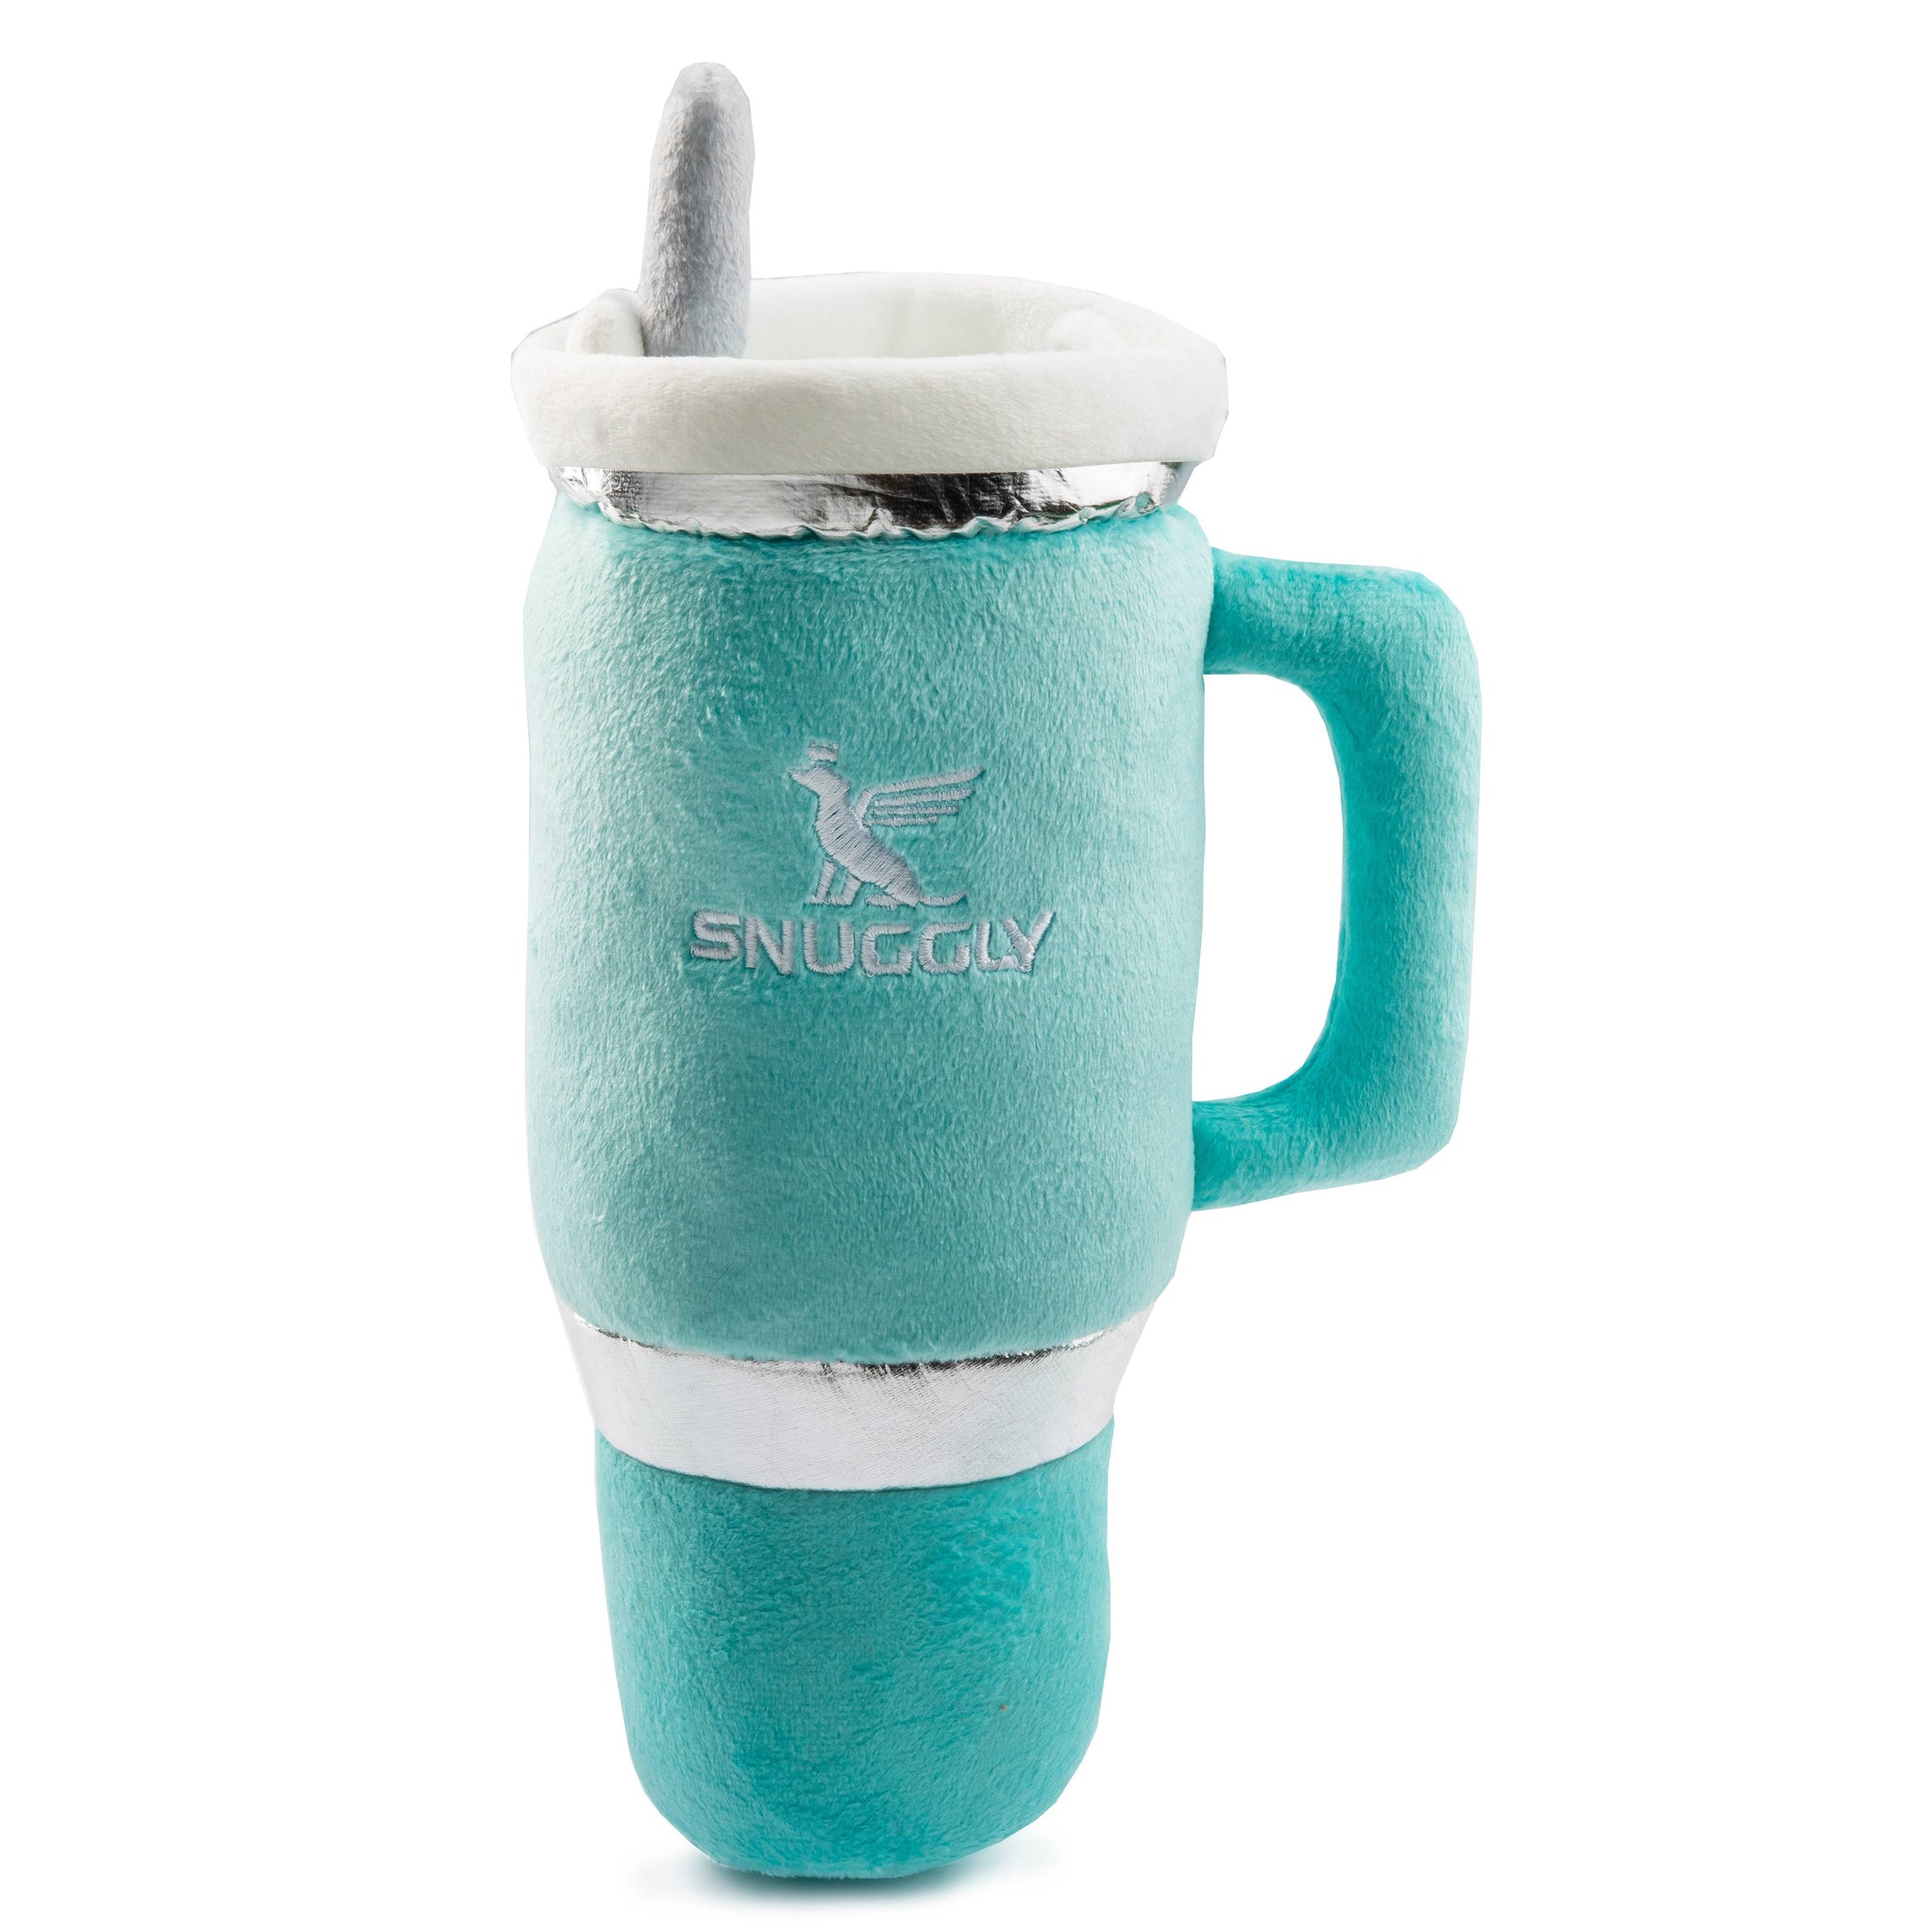 Snuggly Cup - Teal